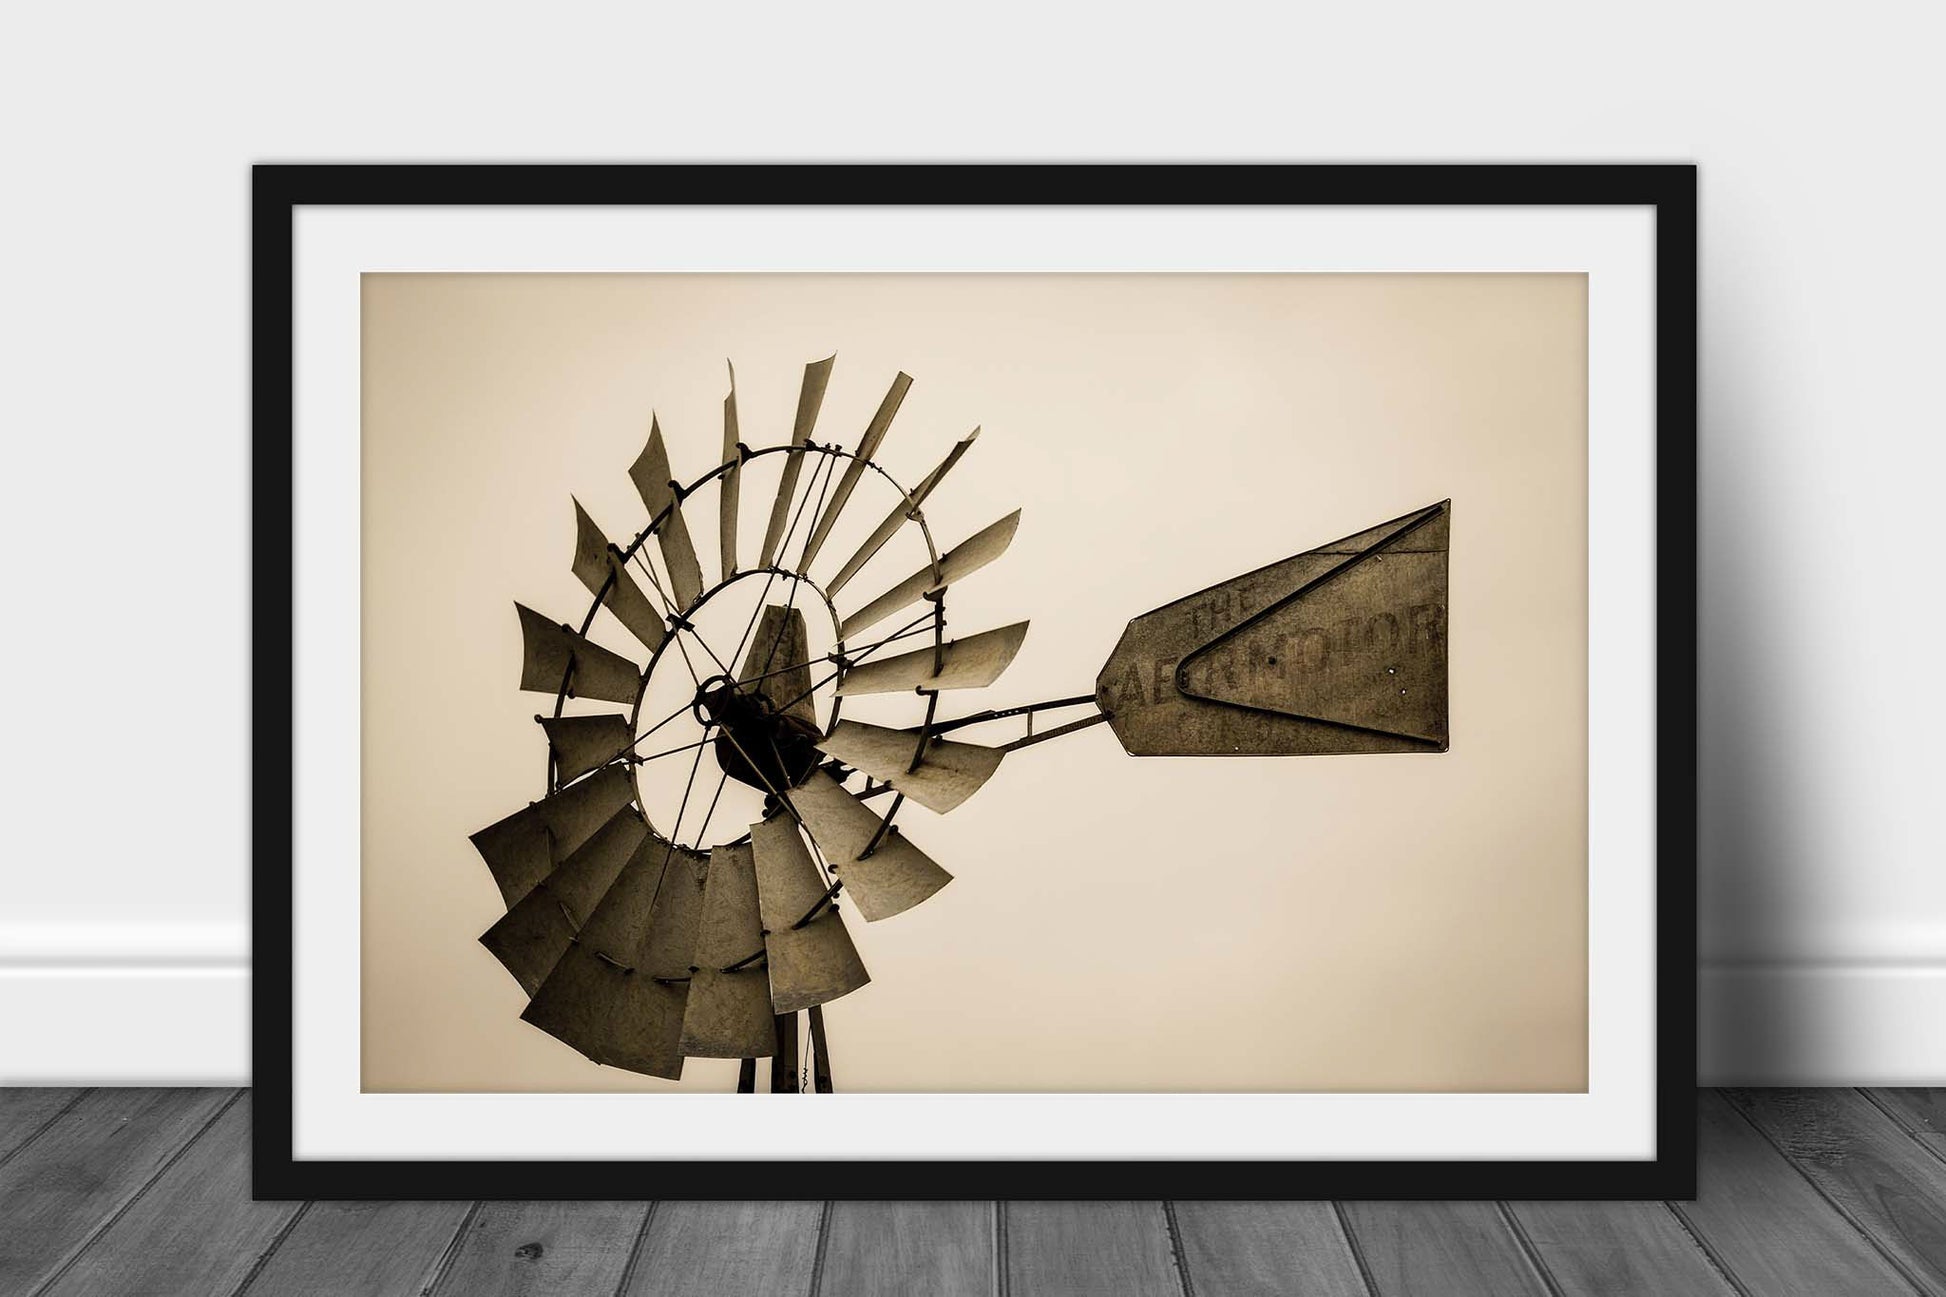 Framed and matted country print in sepia tone of a windmill head and tail on a farm in Iowa by Sean Ramsey of Southern Plains Photography.